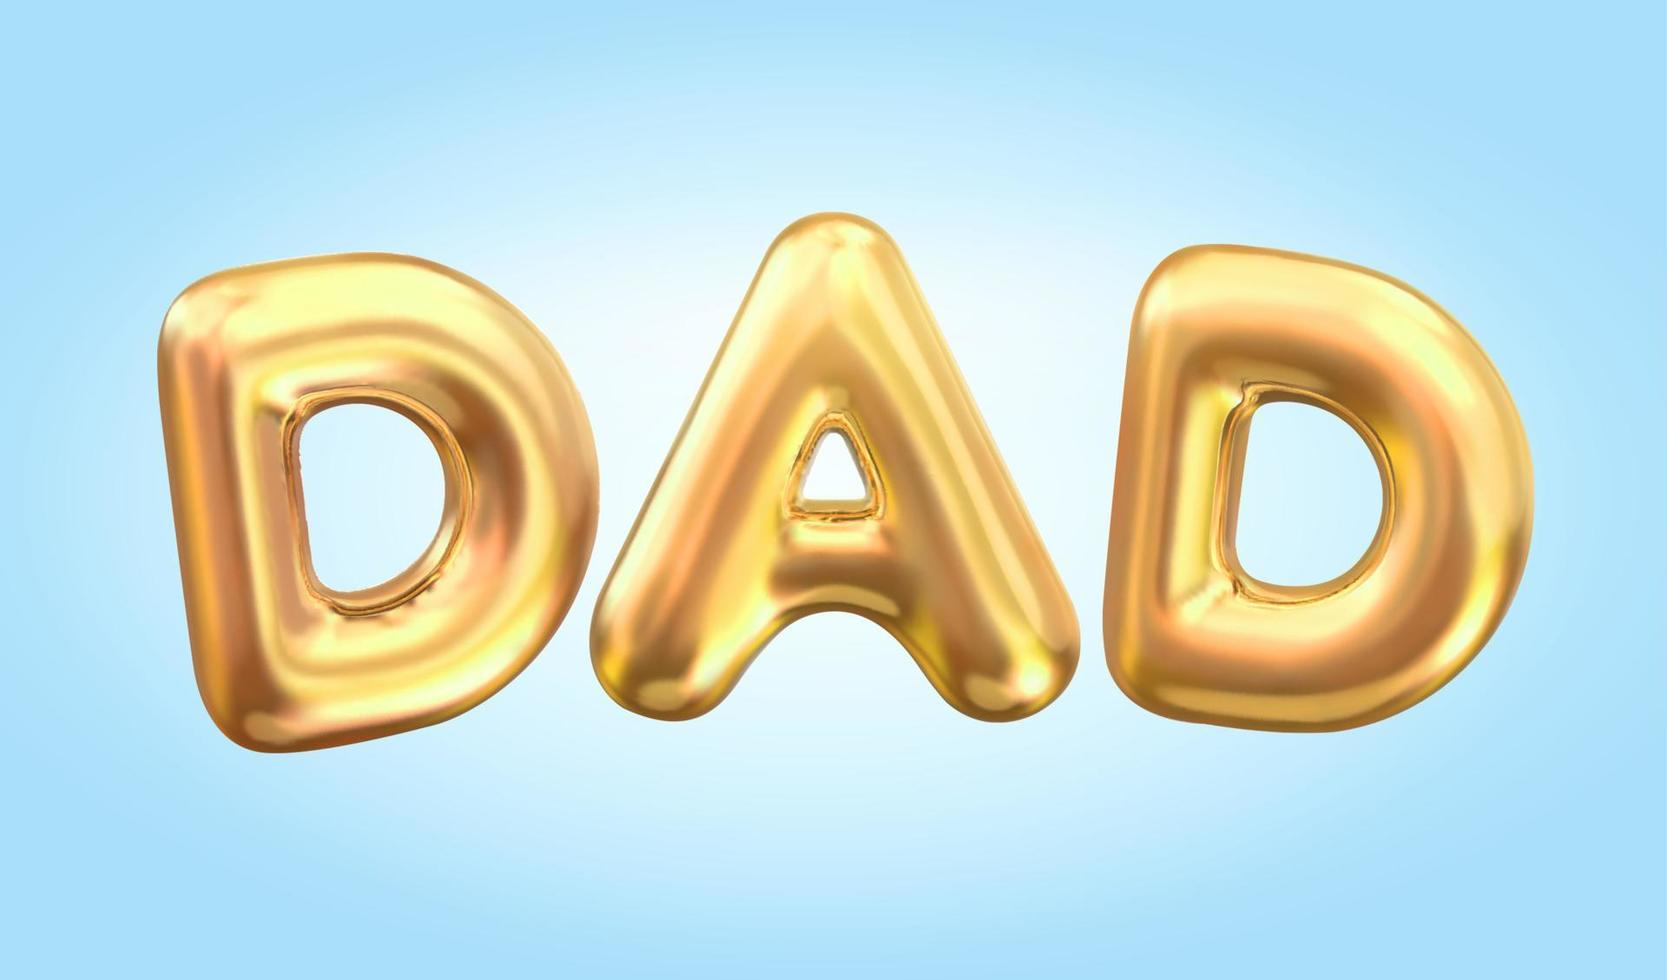 3d balloon typeface design. Gold capital letters of dad written in realistic balloons vector